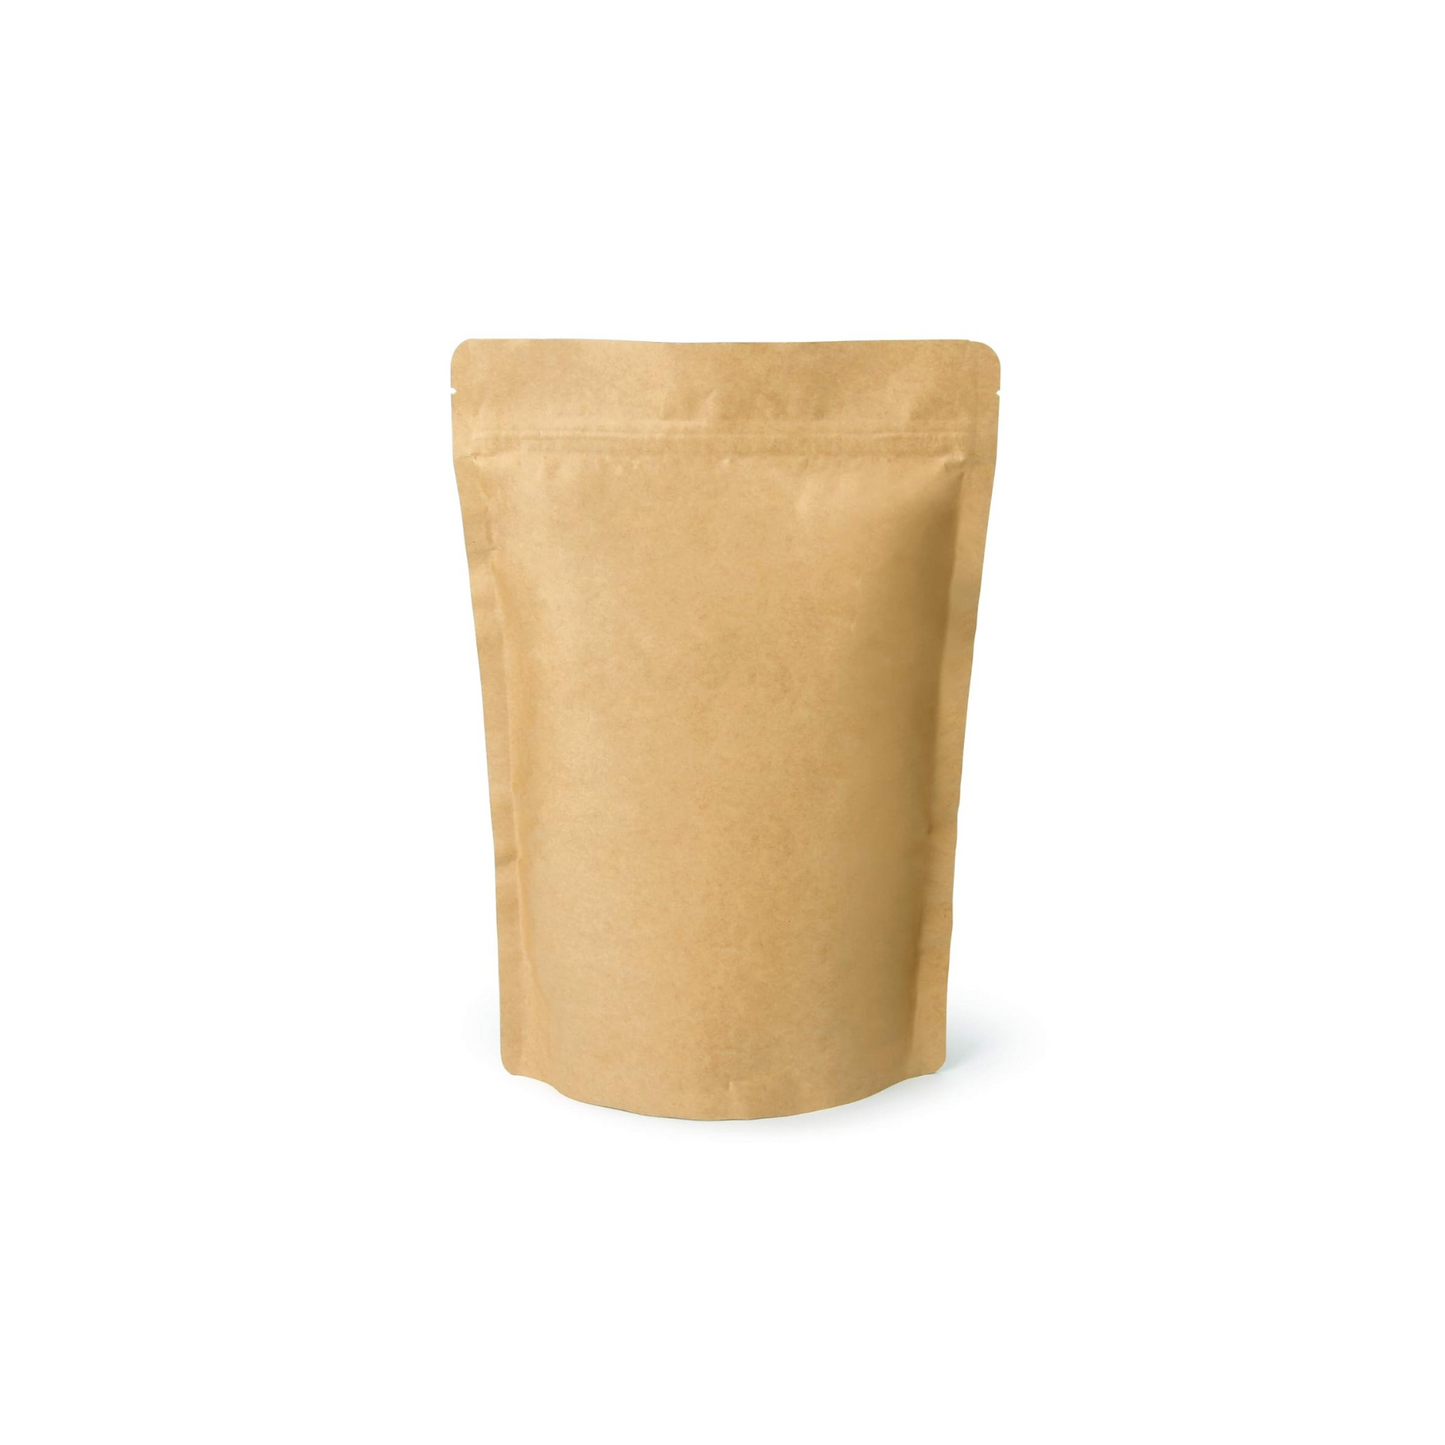 Stand Up Pouches No Valve 16 Oz For Packaging Nuts, Snacks, Coffee Beans, Cookies, Candy